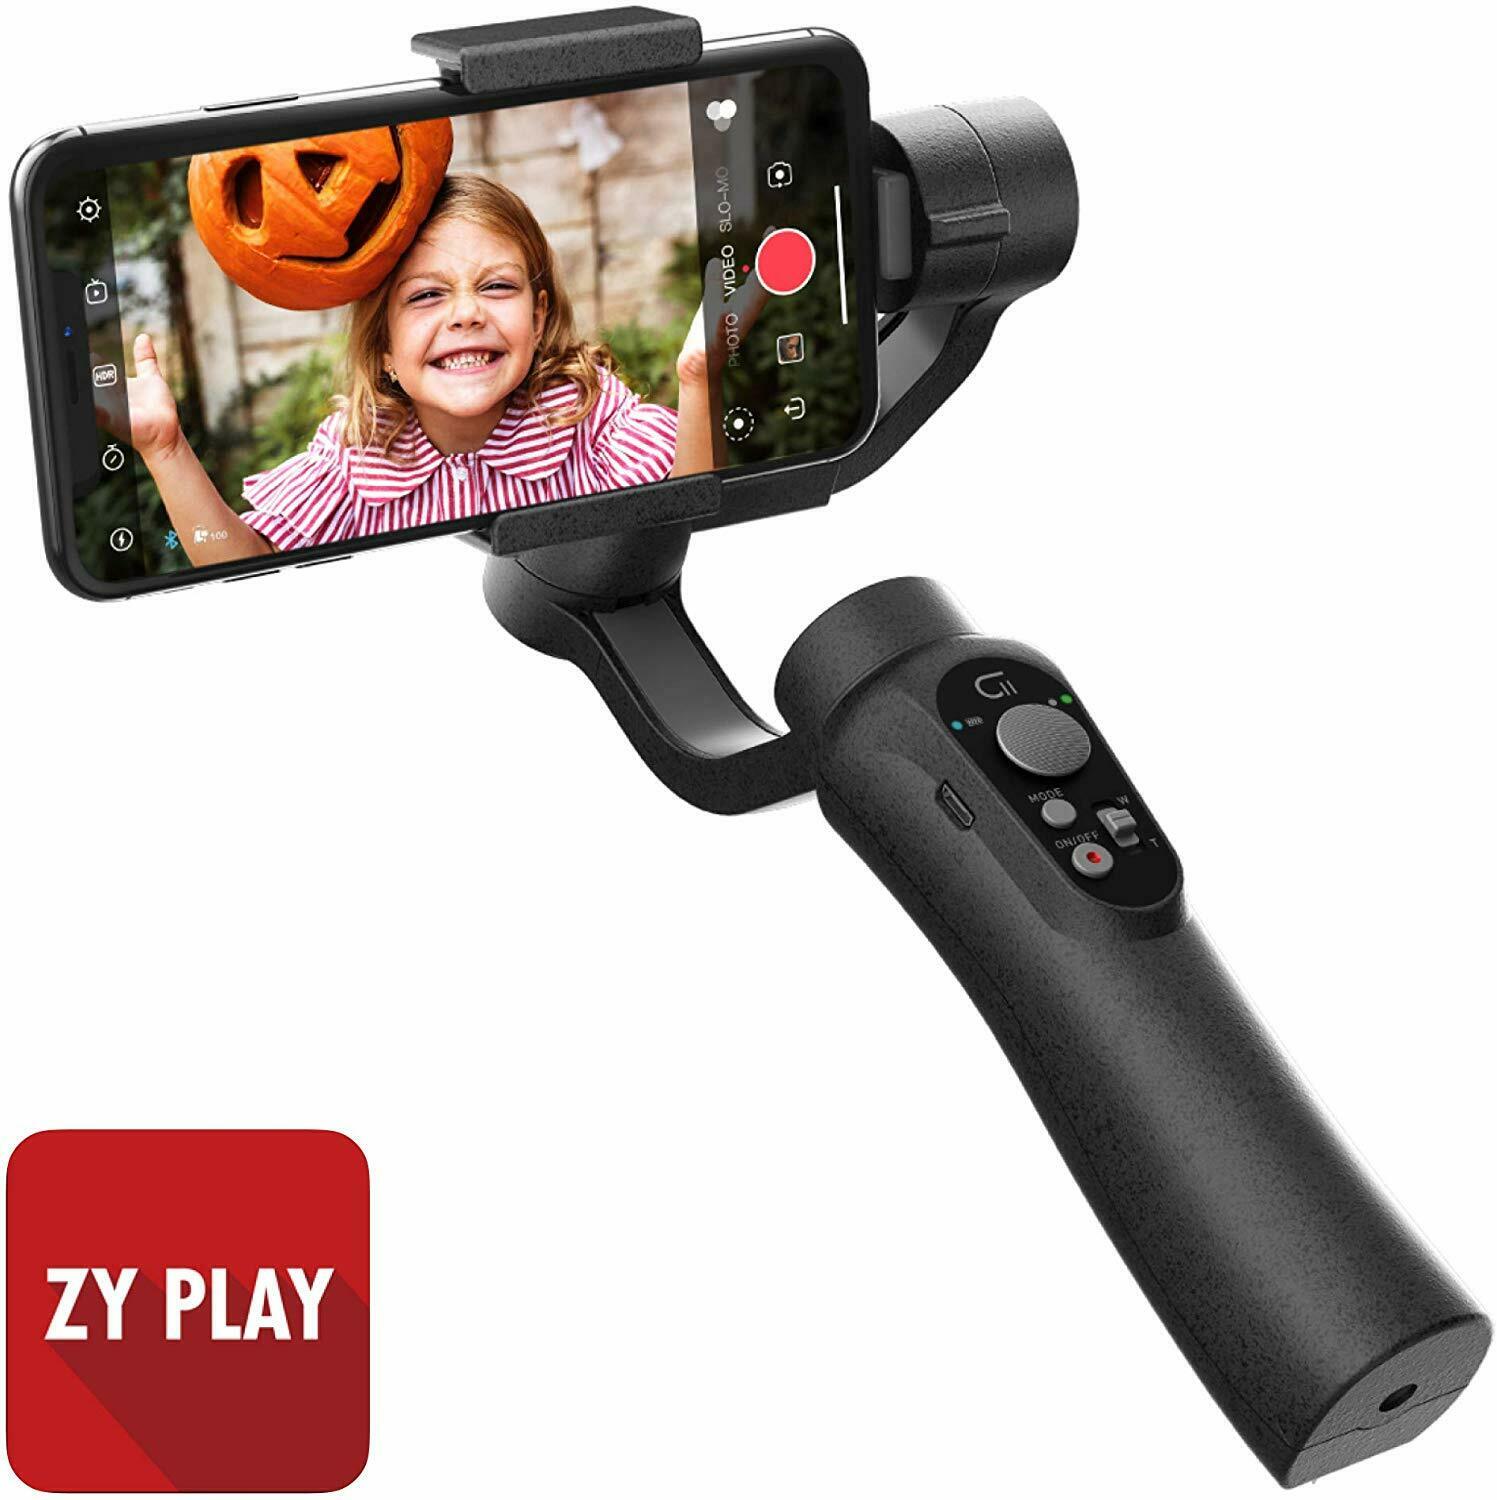 Zhiyun Cinepeer C11 Handheld Gimbal Stabilizer For Smartphone Iphone Android